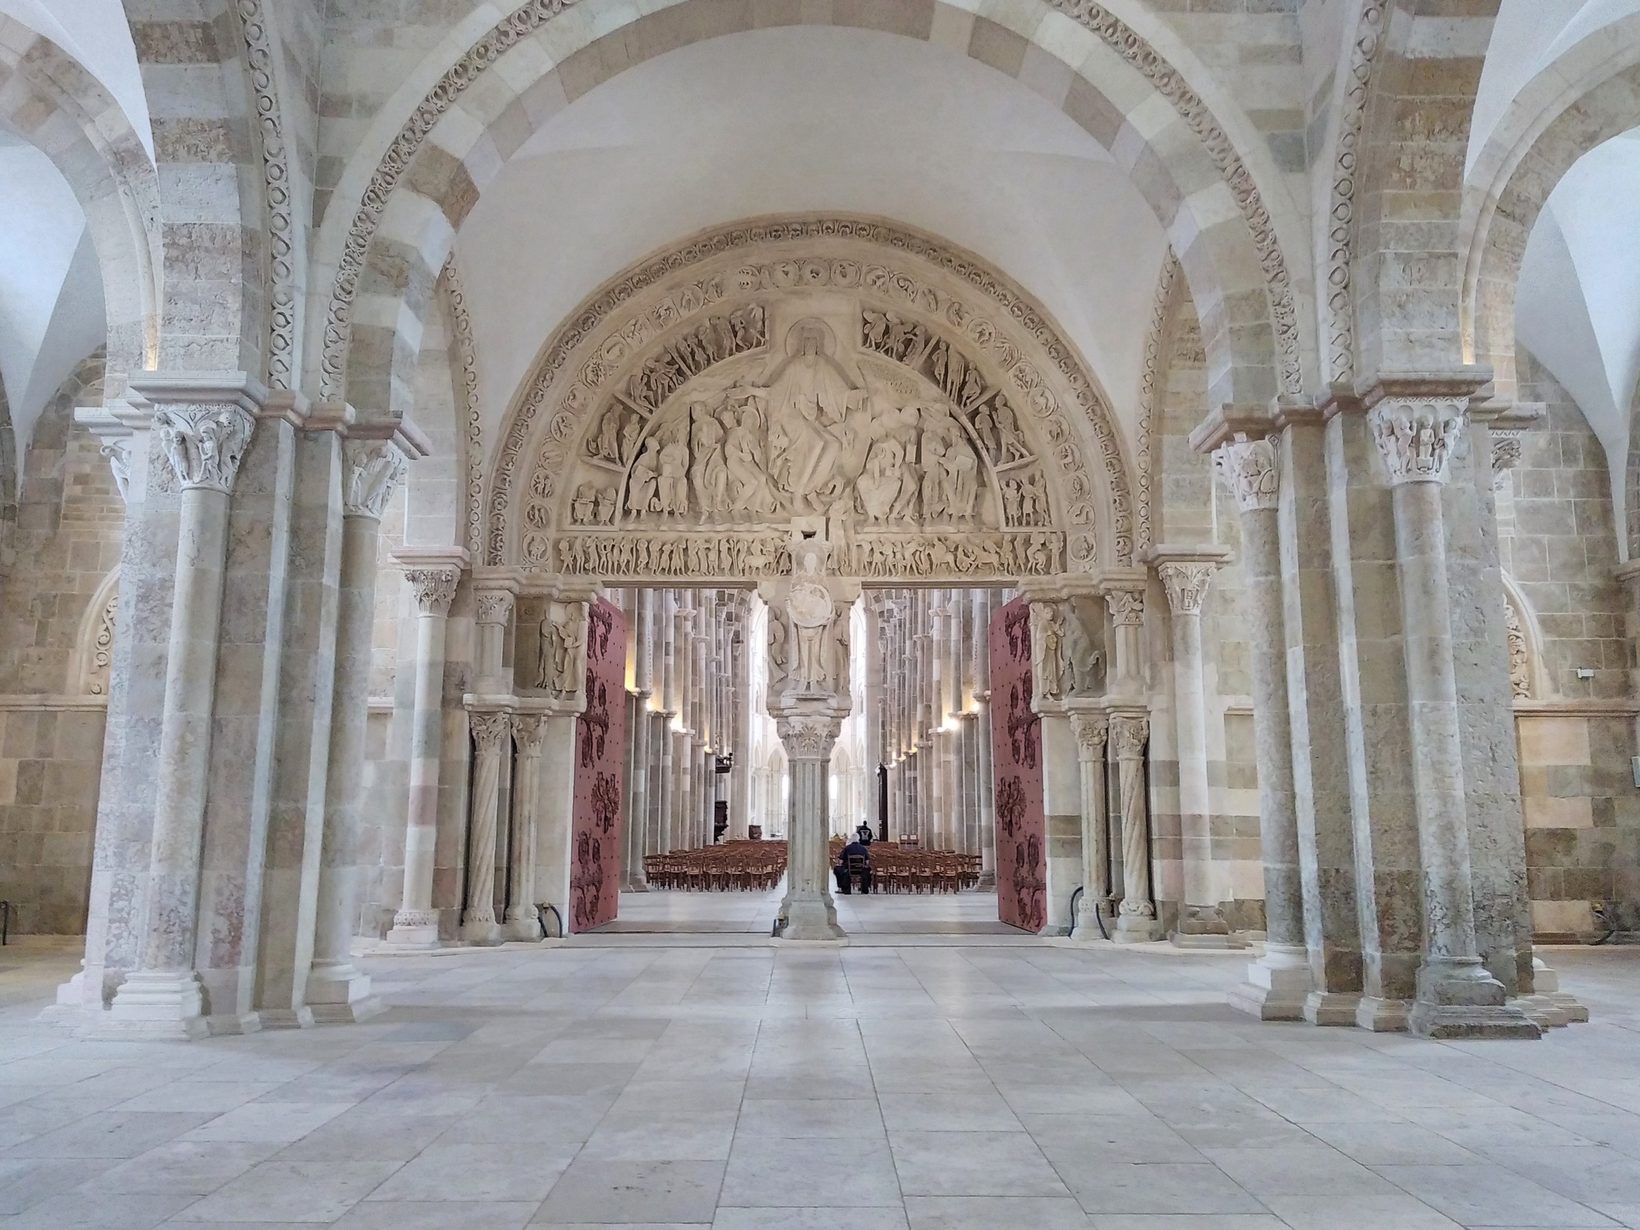 UNESCO listed Vézelay Abbey constructed between 1120 and 1150.